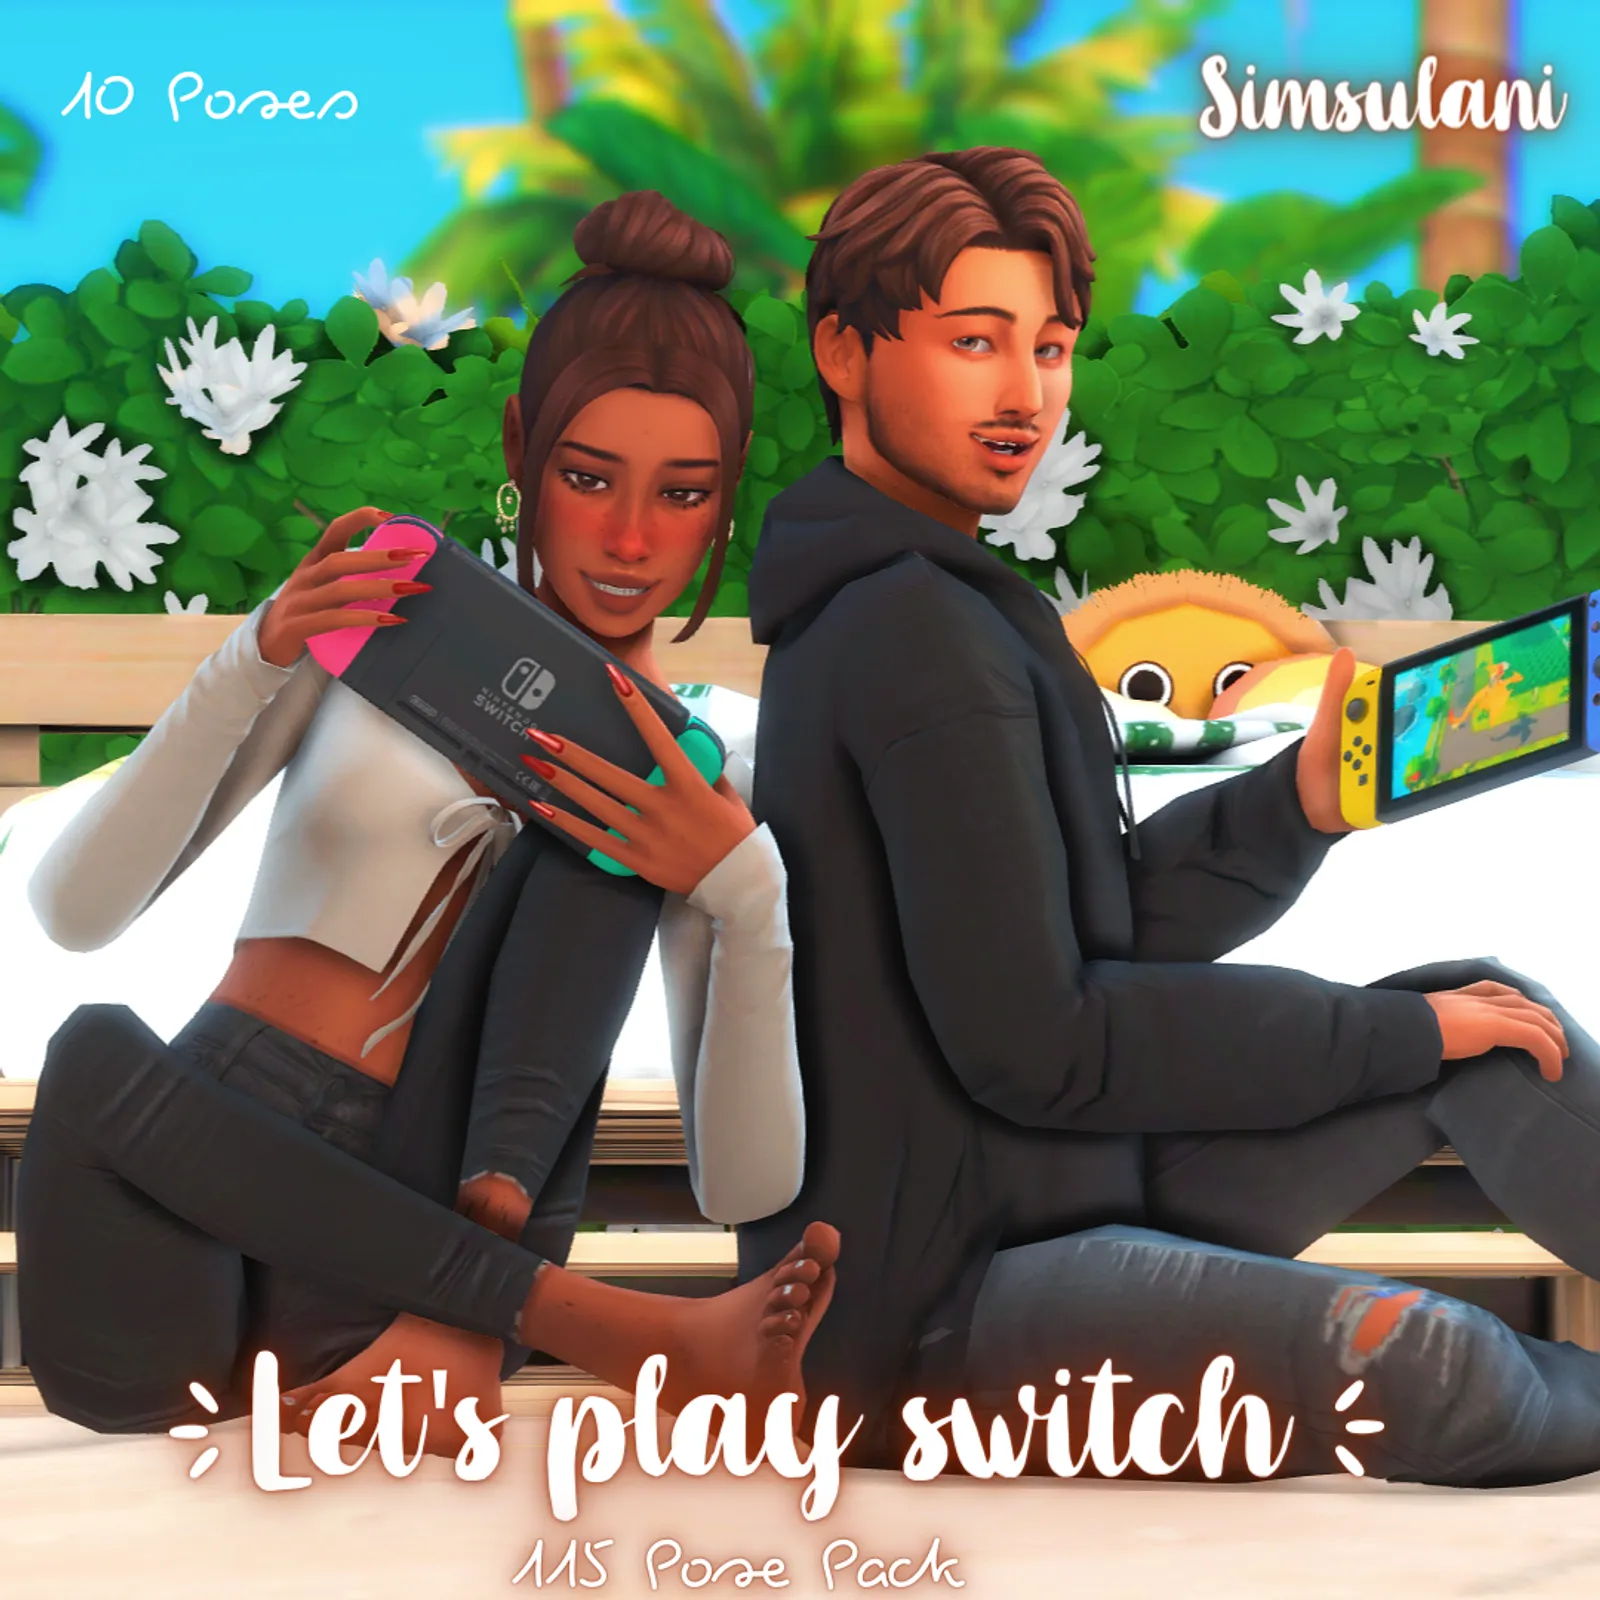 #115 Pose Pack "Let's play switch" ?